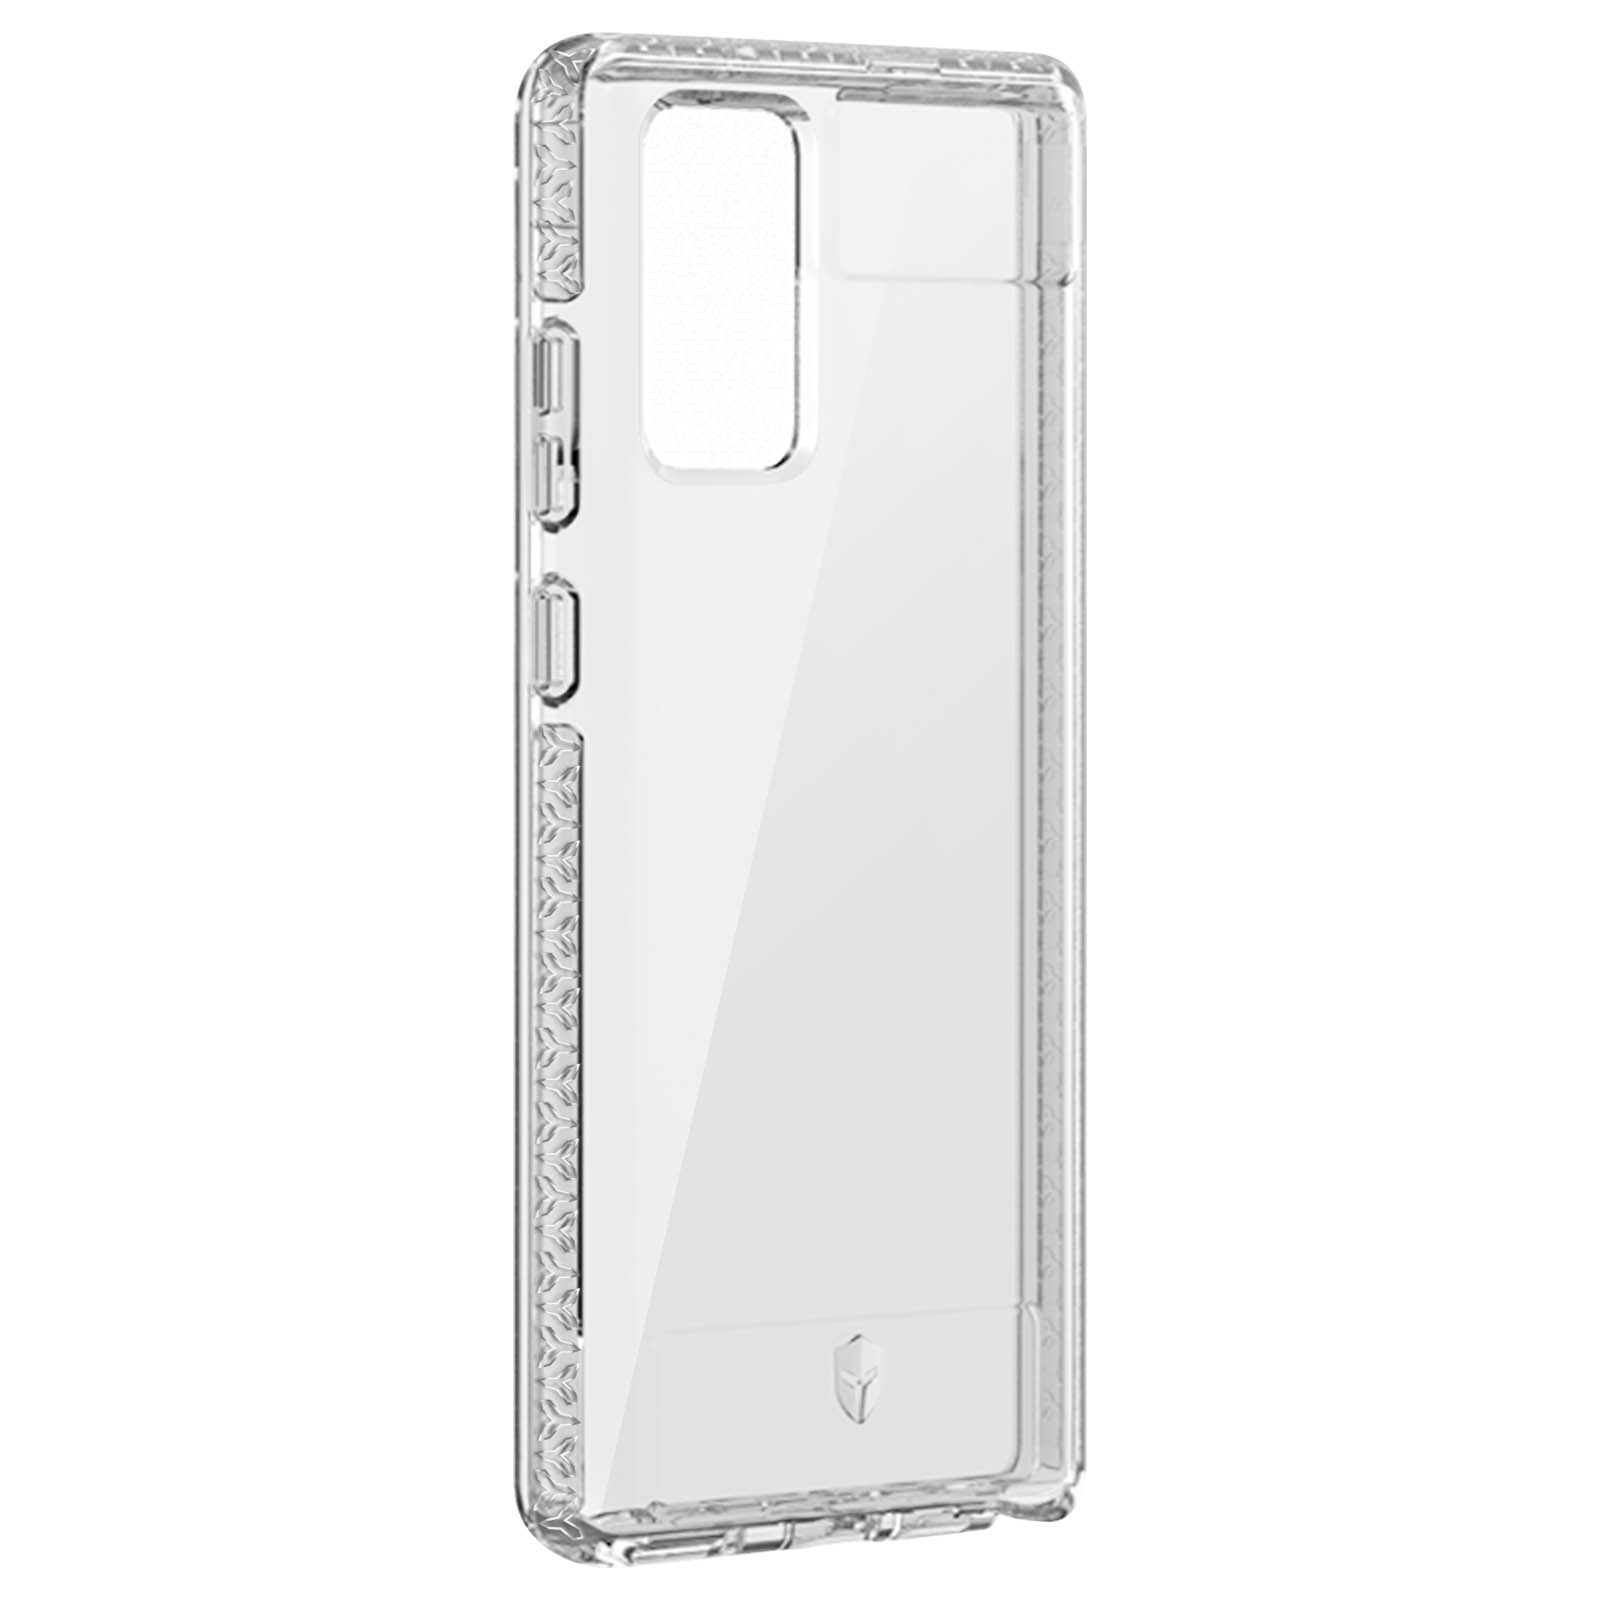 FORCE CASE Life mit Tryax-System Series, Note Backcover, Transparent 20, Galaxy Samsung